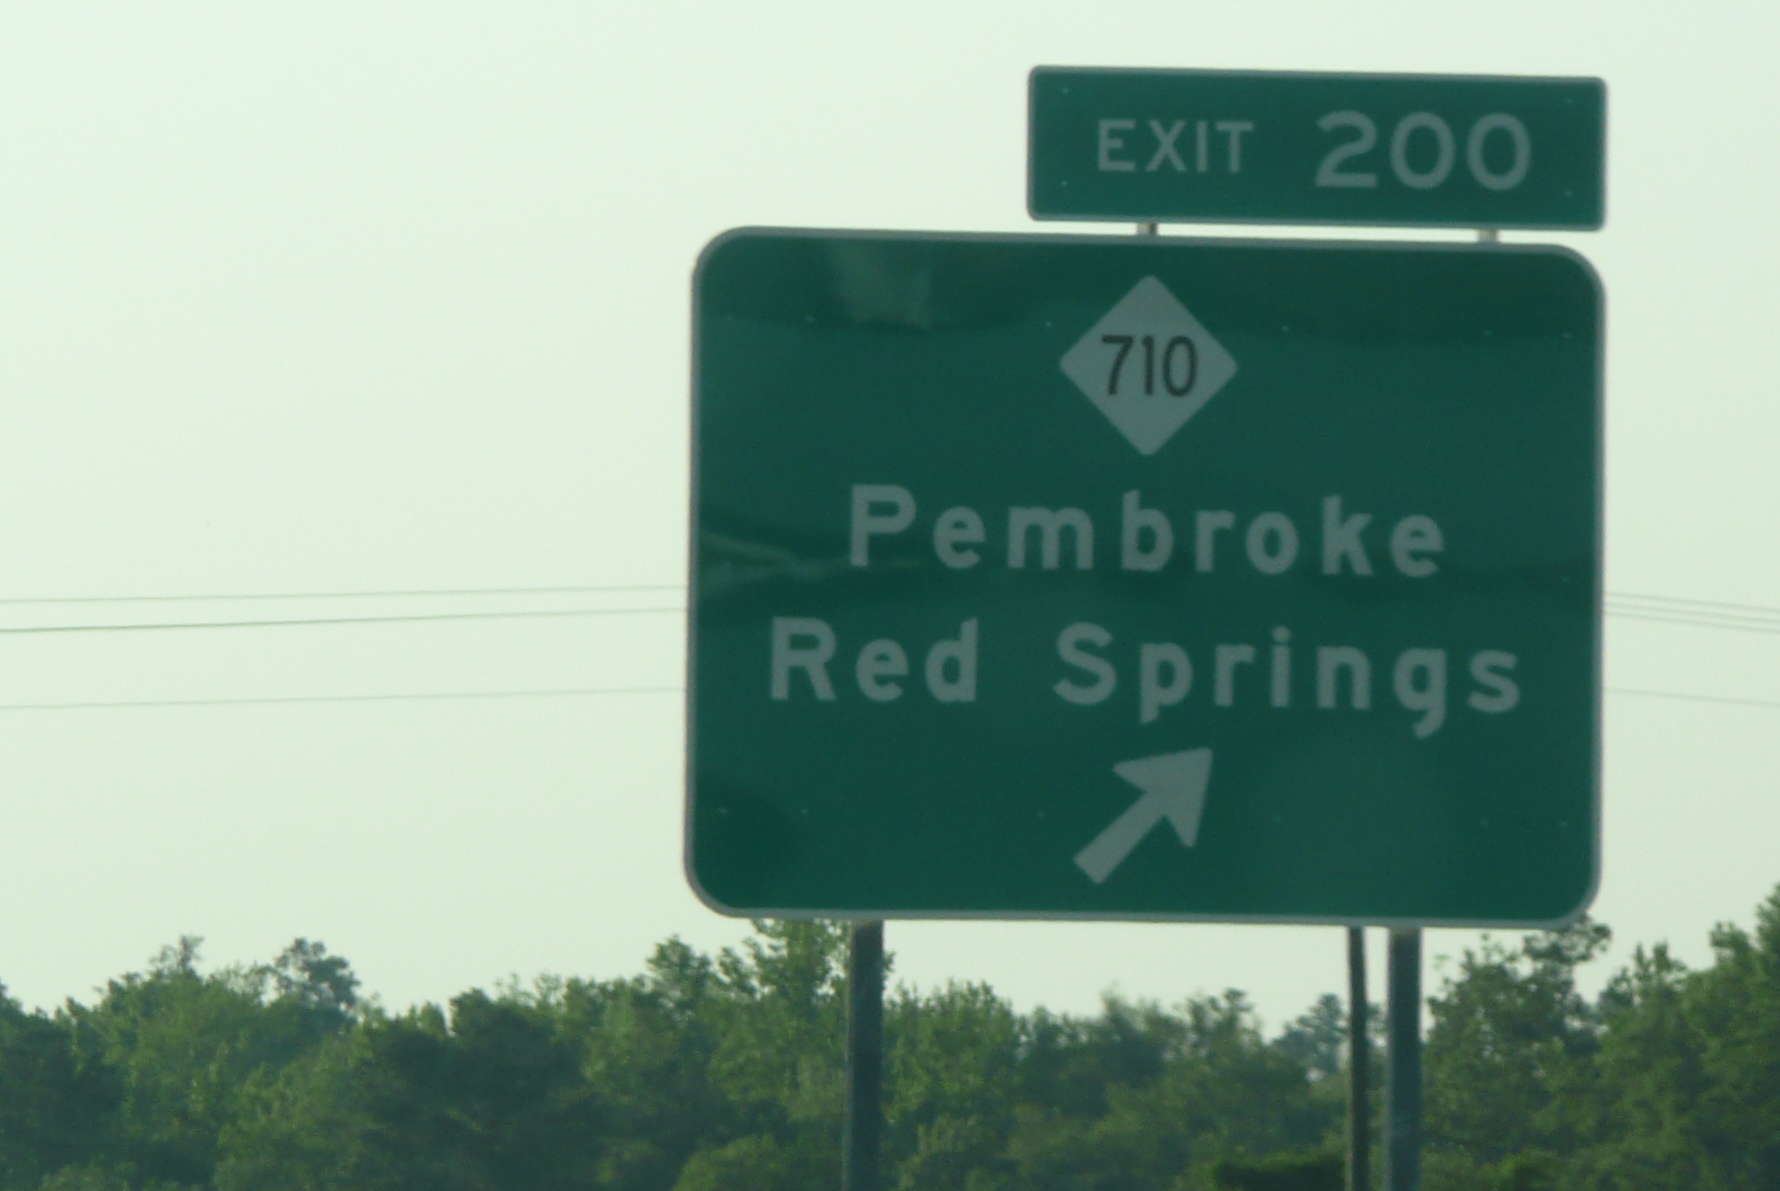 Photo of exit signage for NC 710 near Pembroke showing correct exit number, 
May 2009, courtesy of James Mast